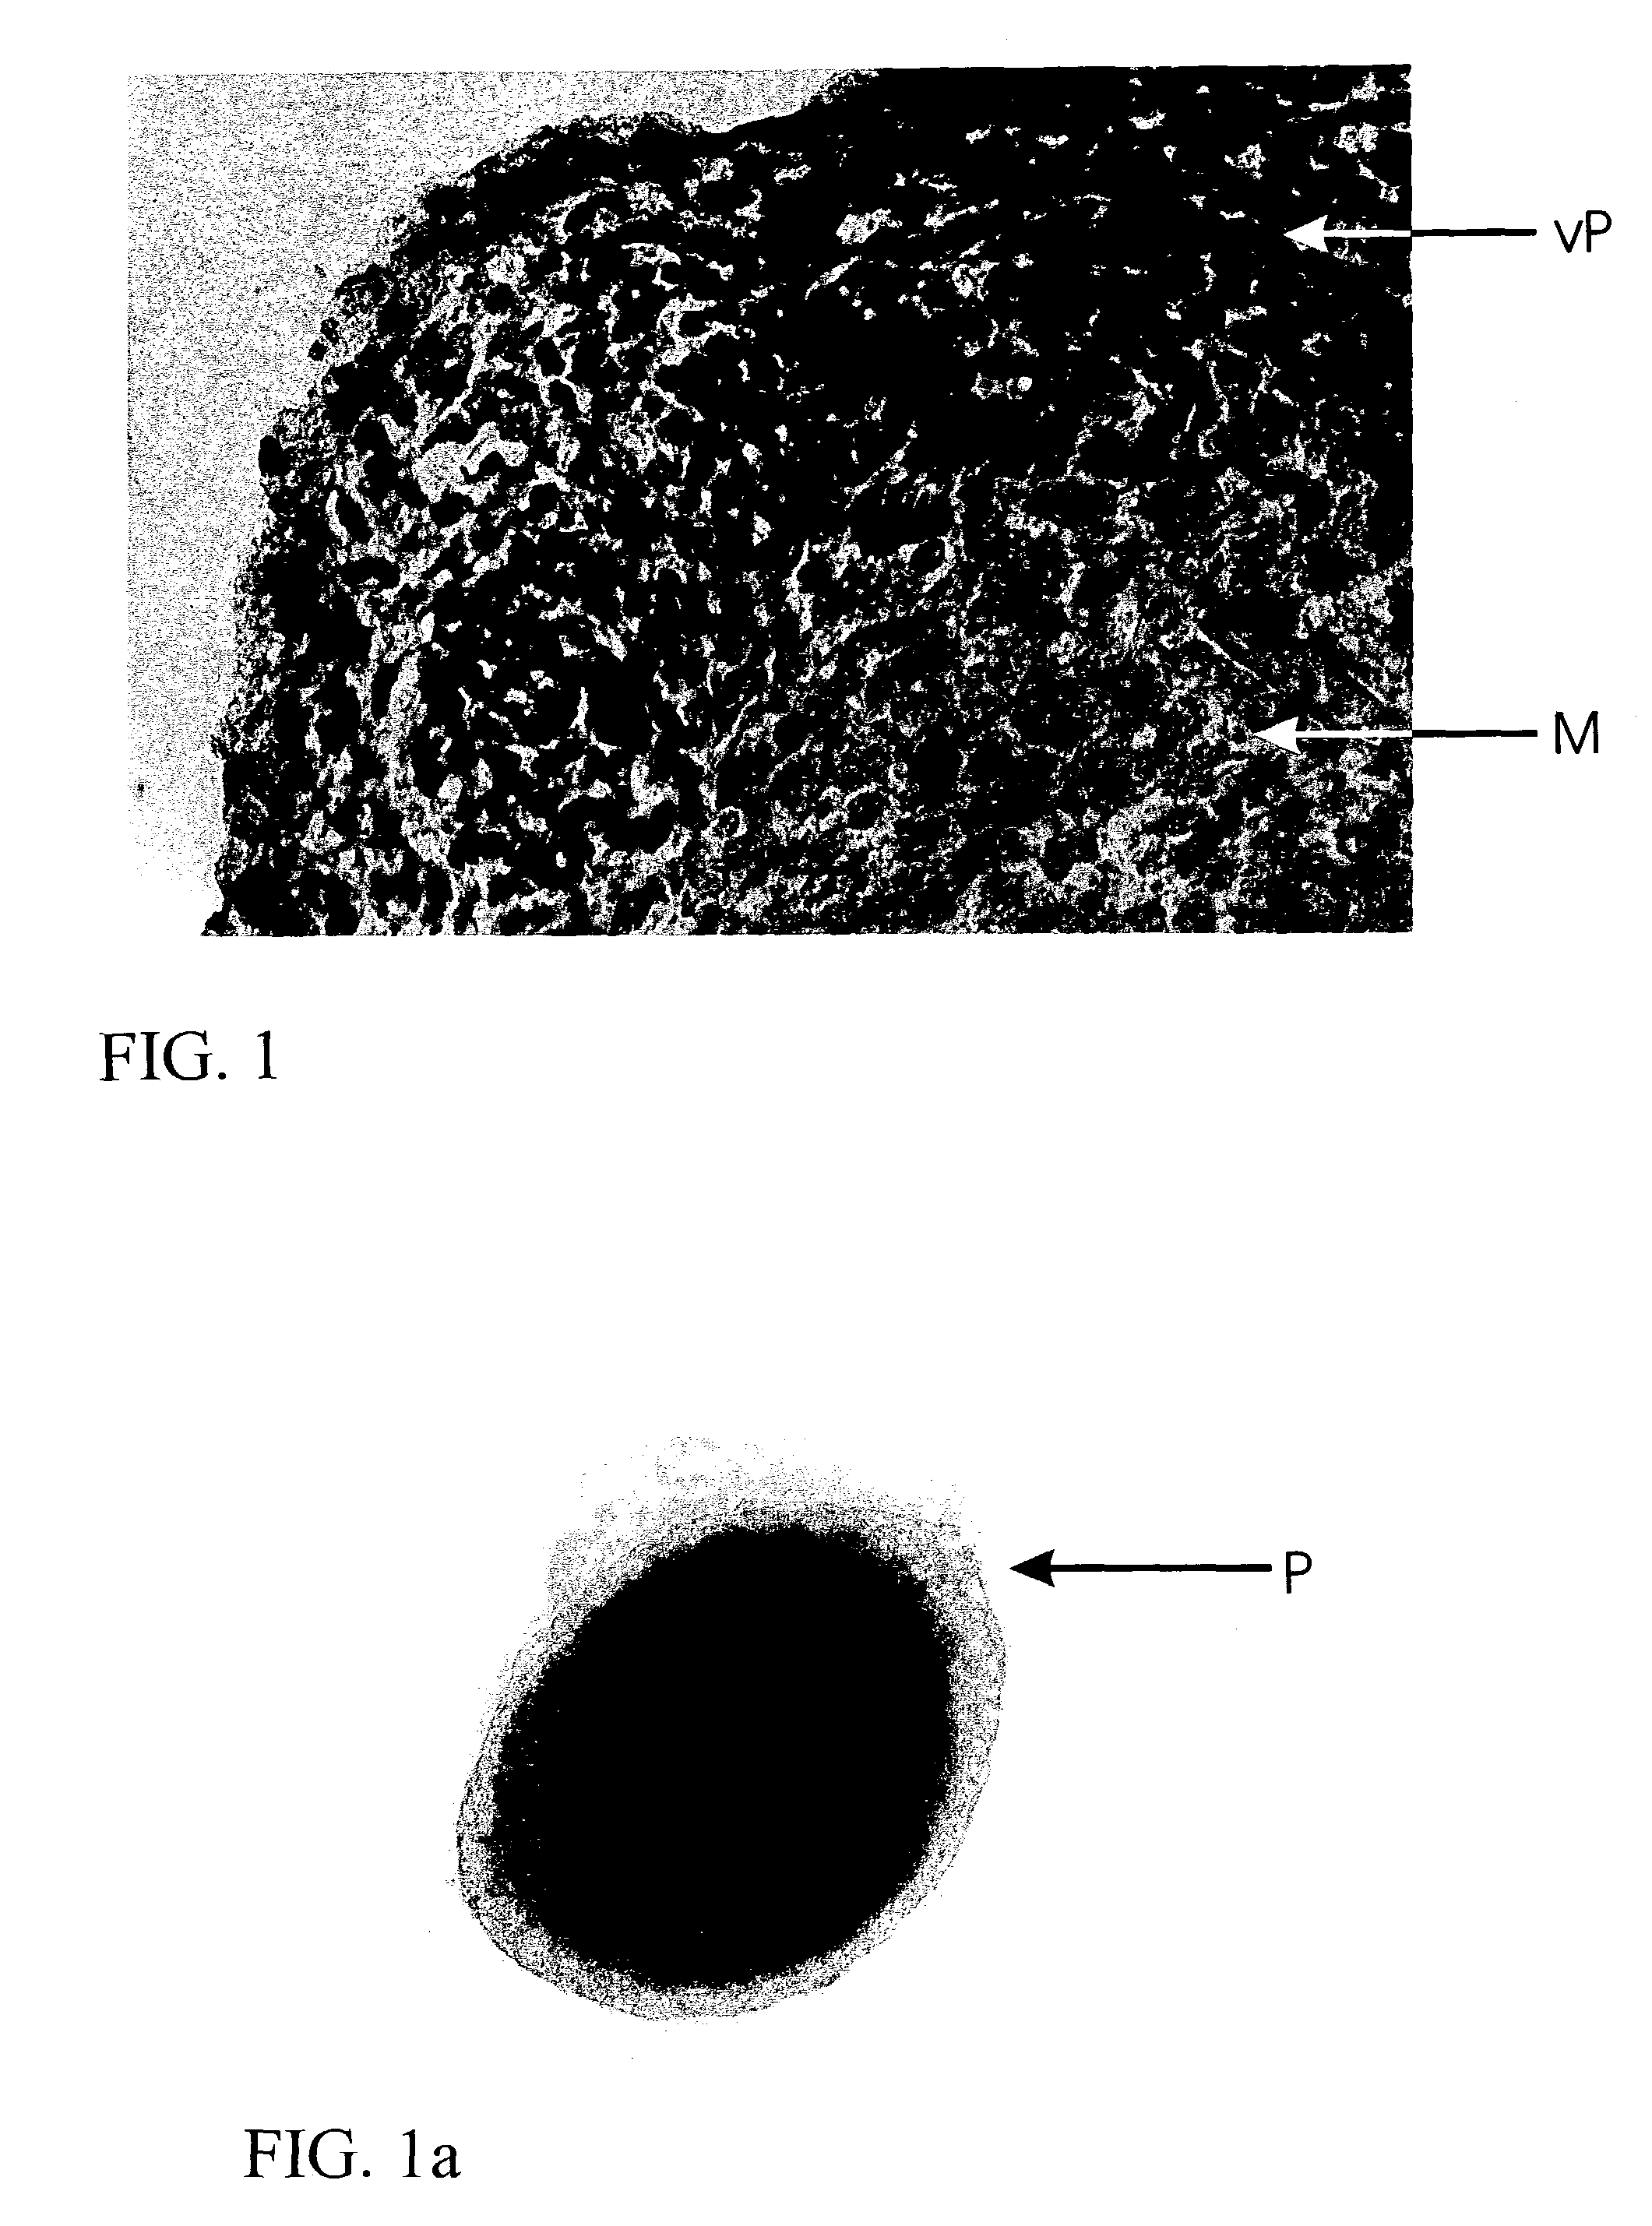 Method for in vitro production of three-dimensional vital cartilage tissue and use thereof as transplant material